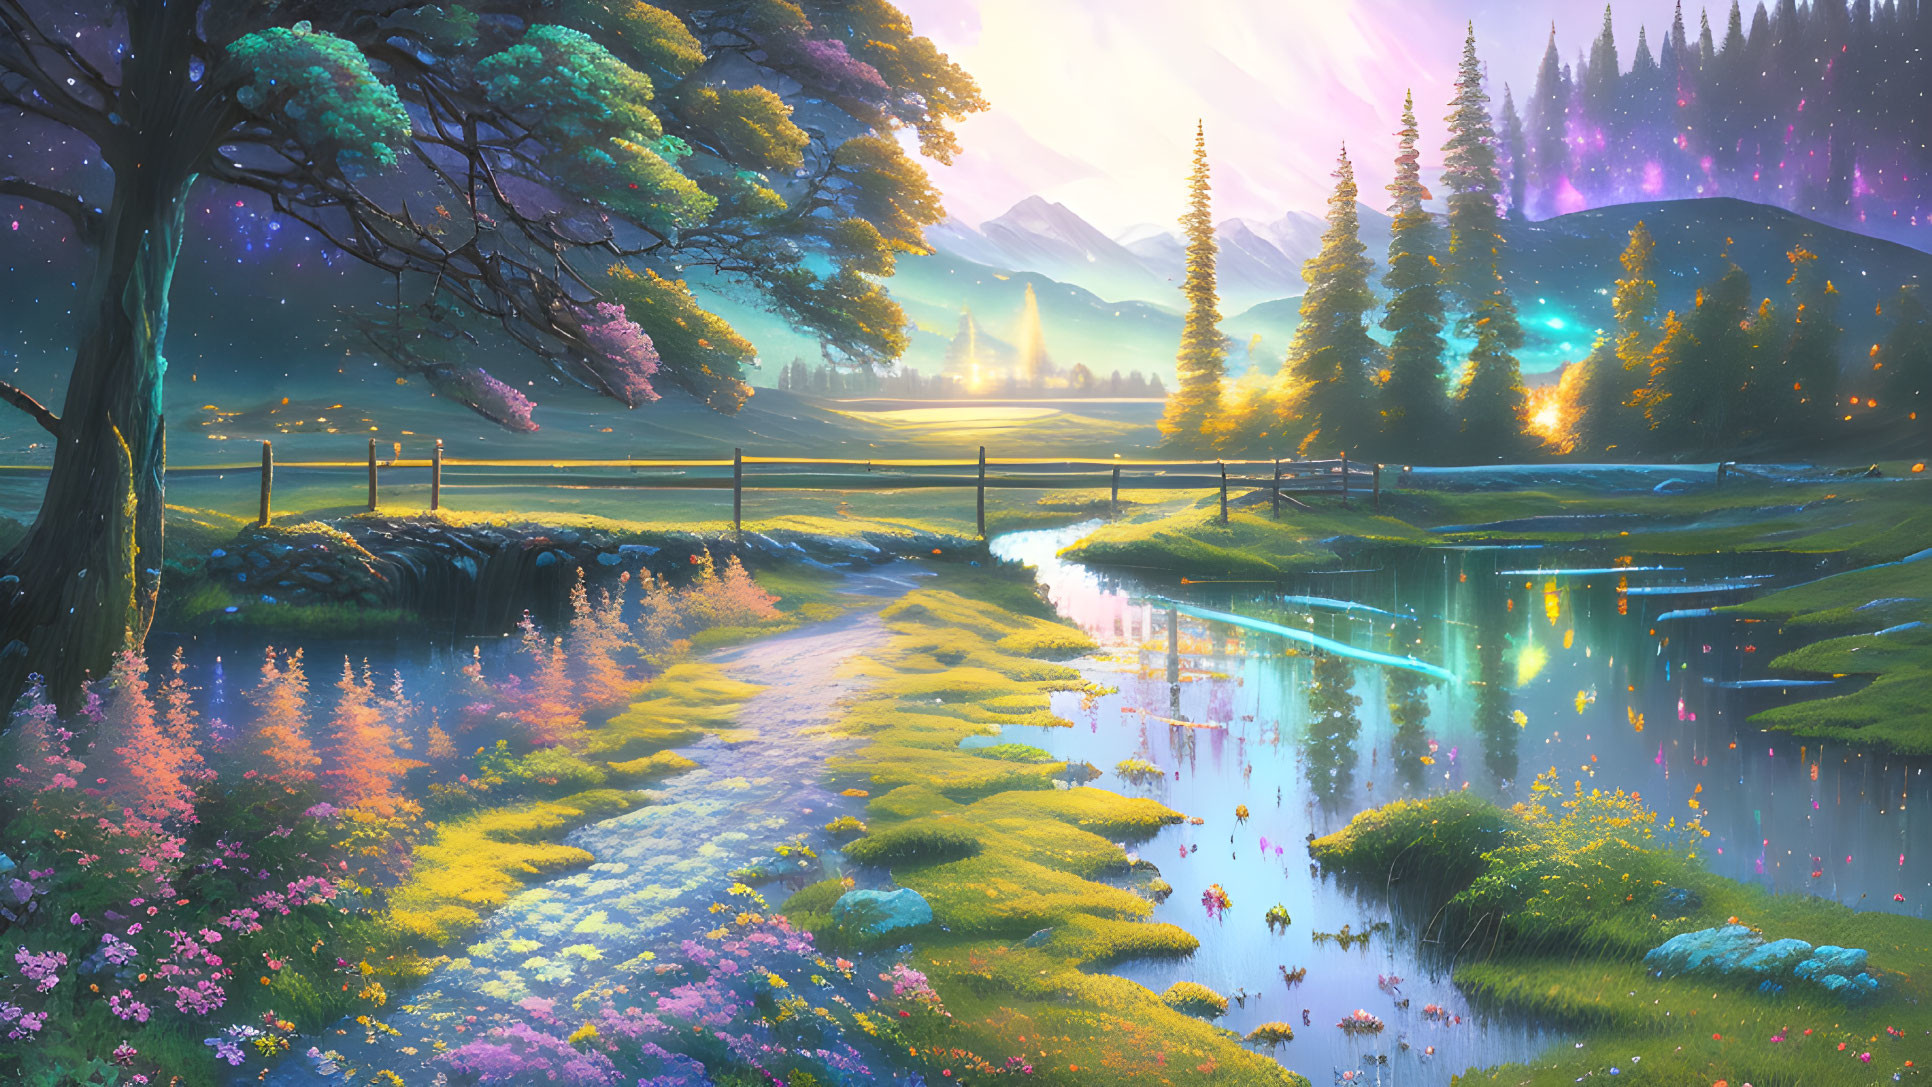 Colorful Fantasy Landscape with River, Flora, Trees, Bridge, and Northern Lights